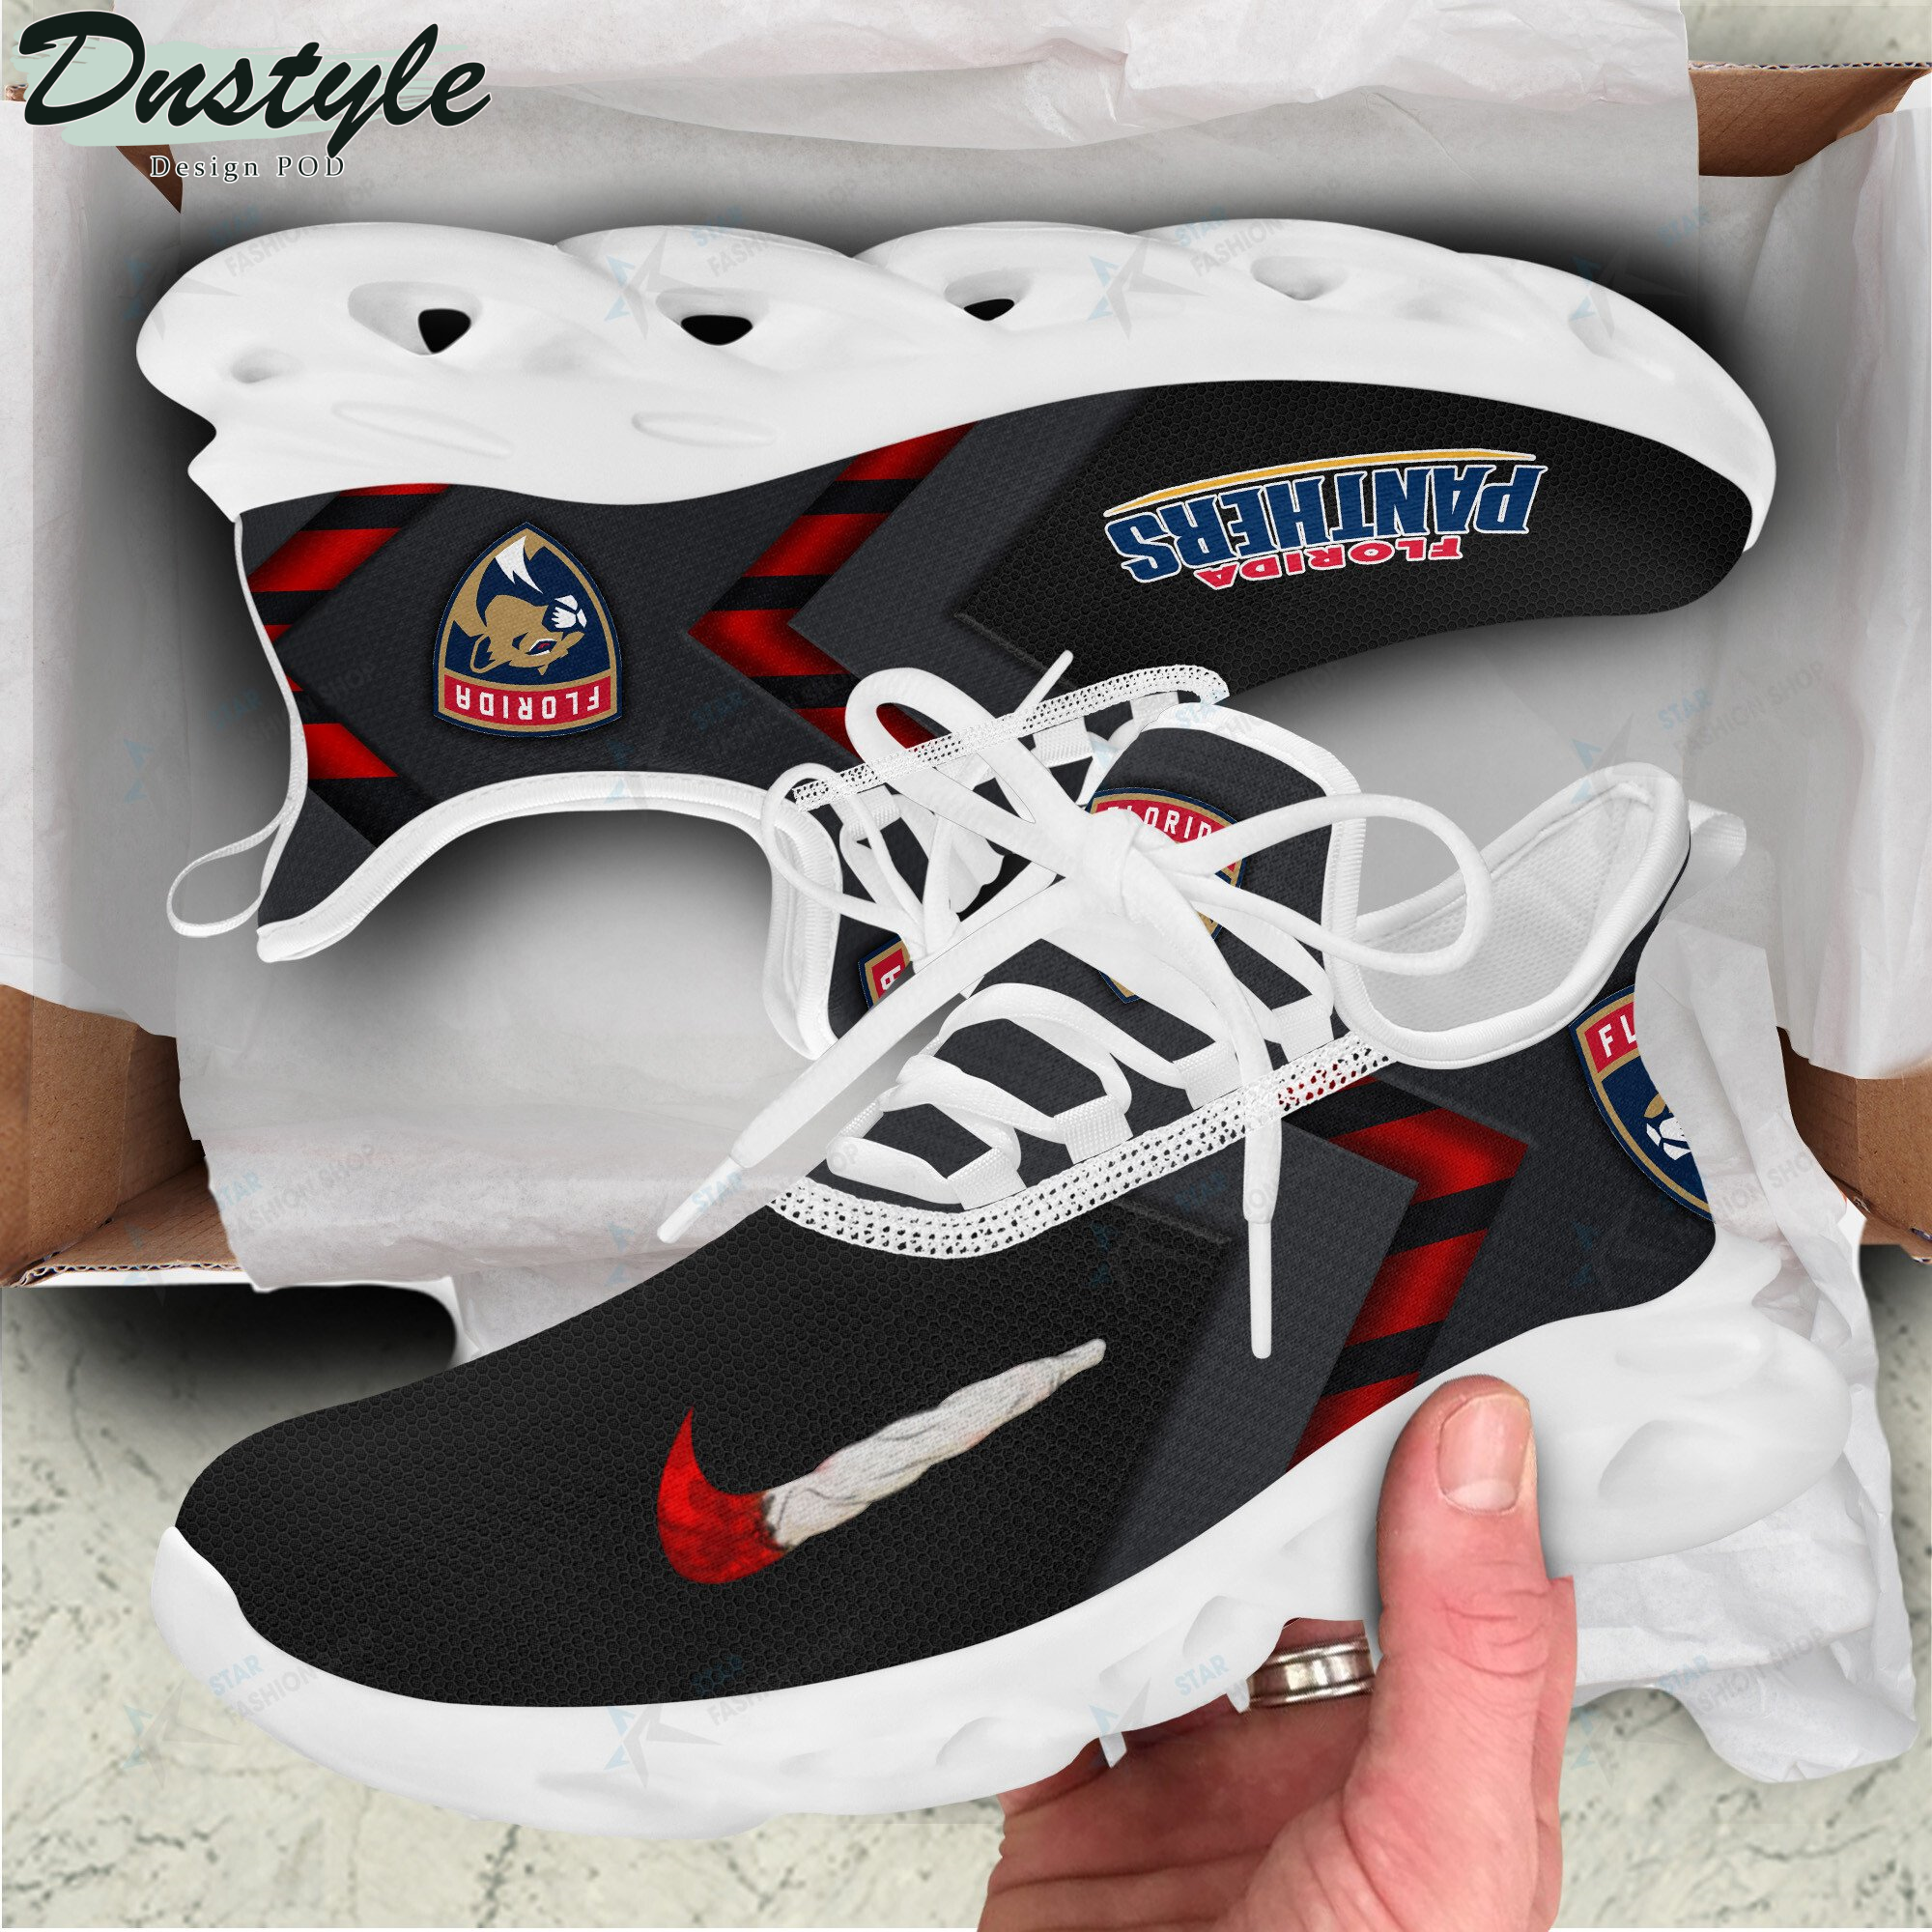 Florida Panthers max soul shoes